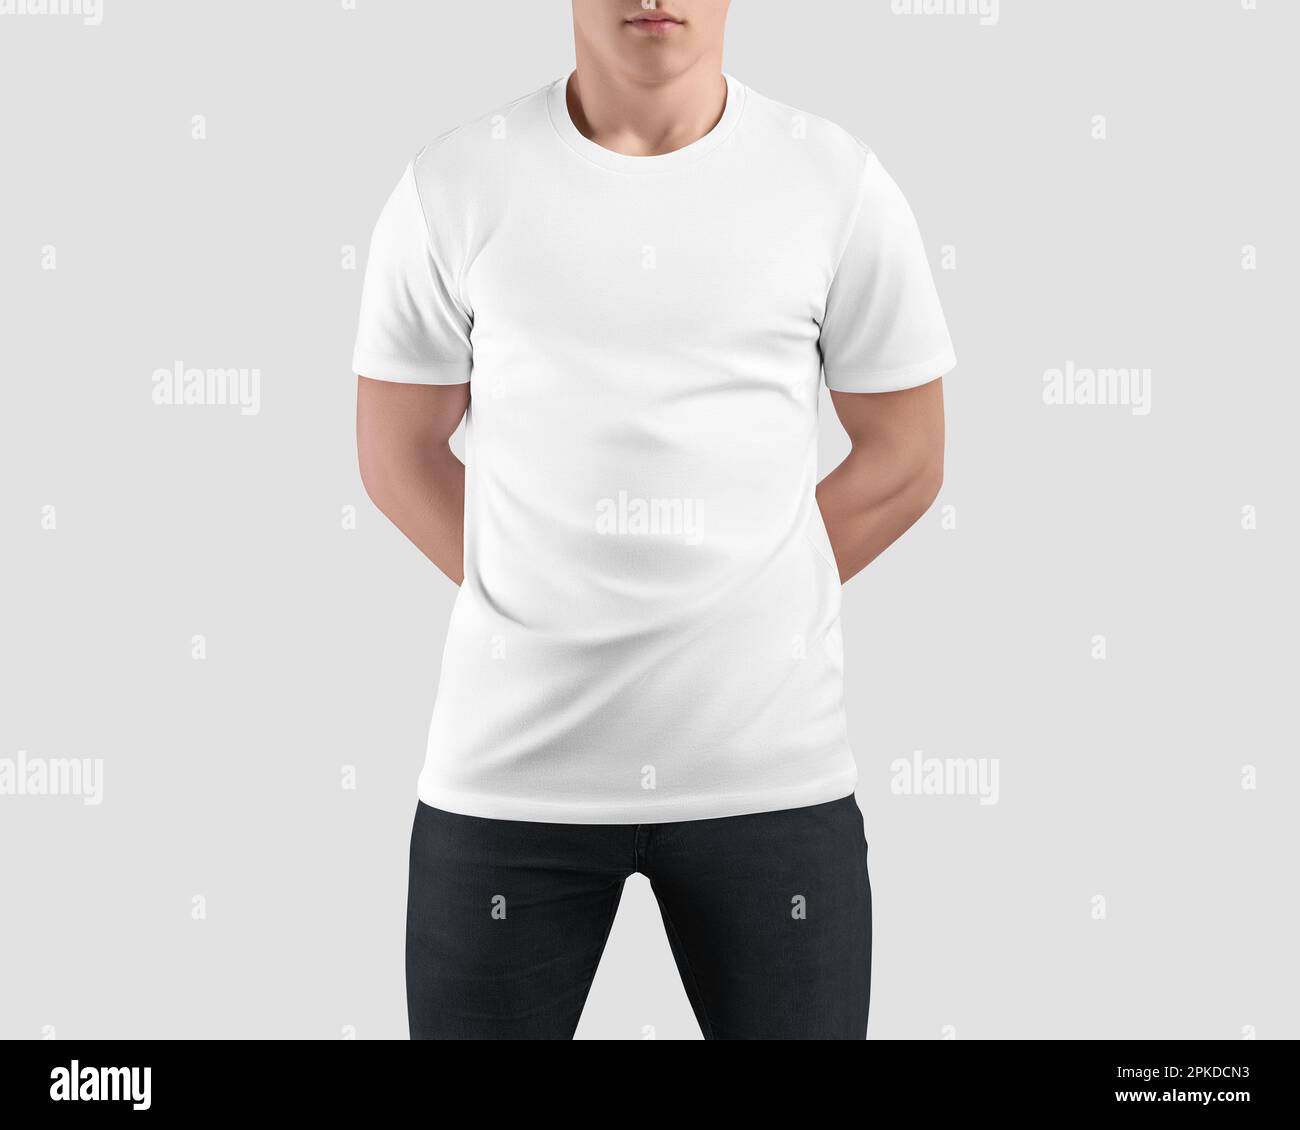 Mockup of white shirt on posing guy, front view, fashionable men's t-shirt, isolated on background. Casual apparel template for commerce, design, bran Stock Photo